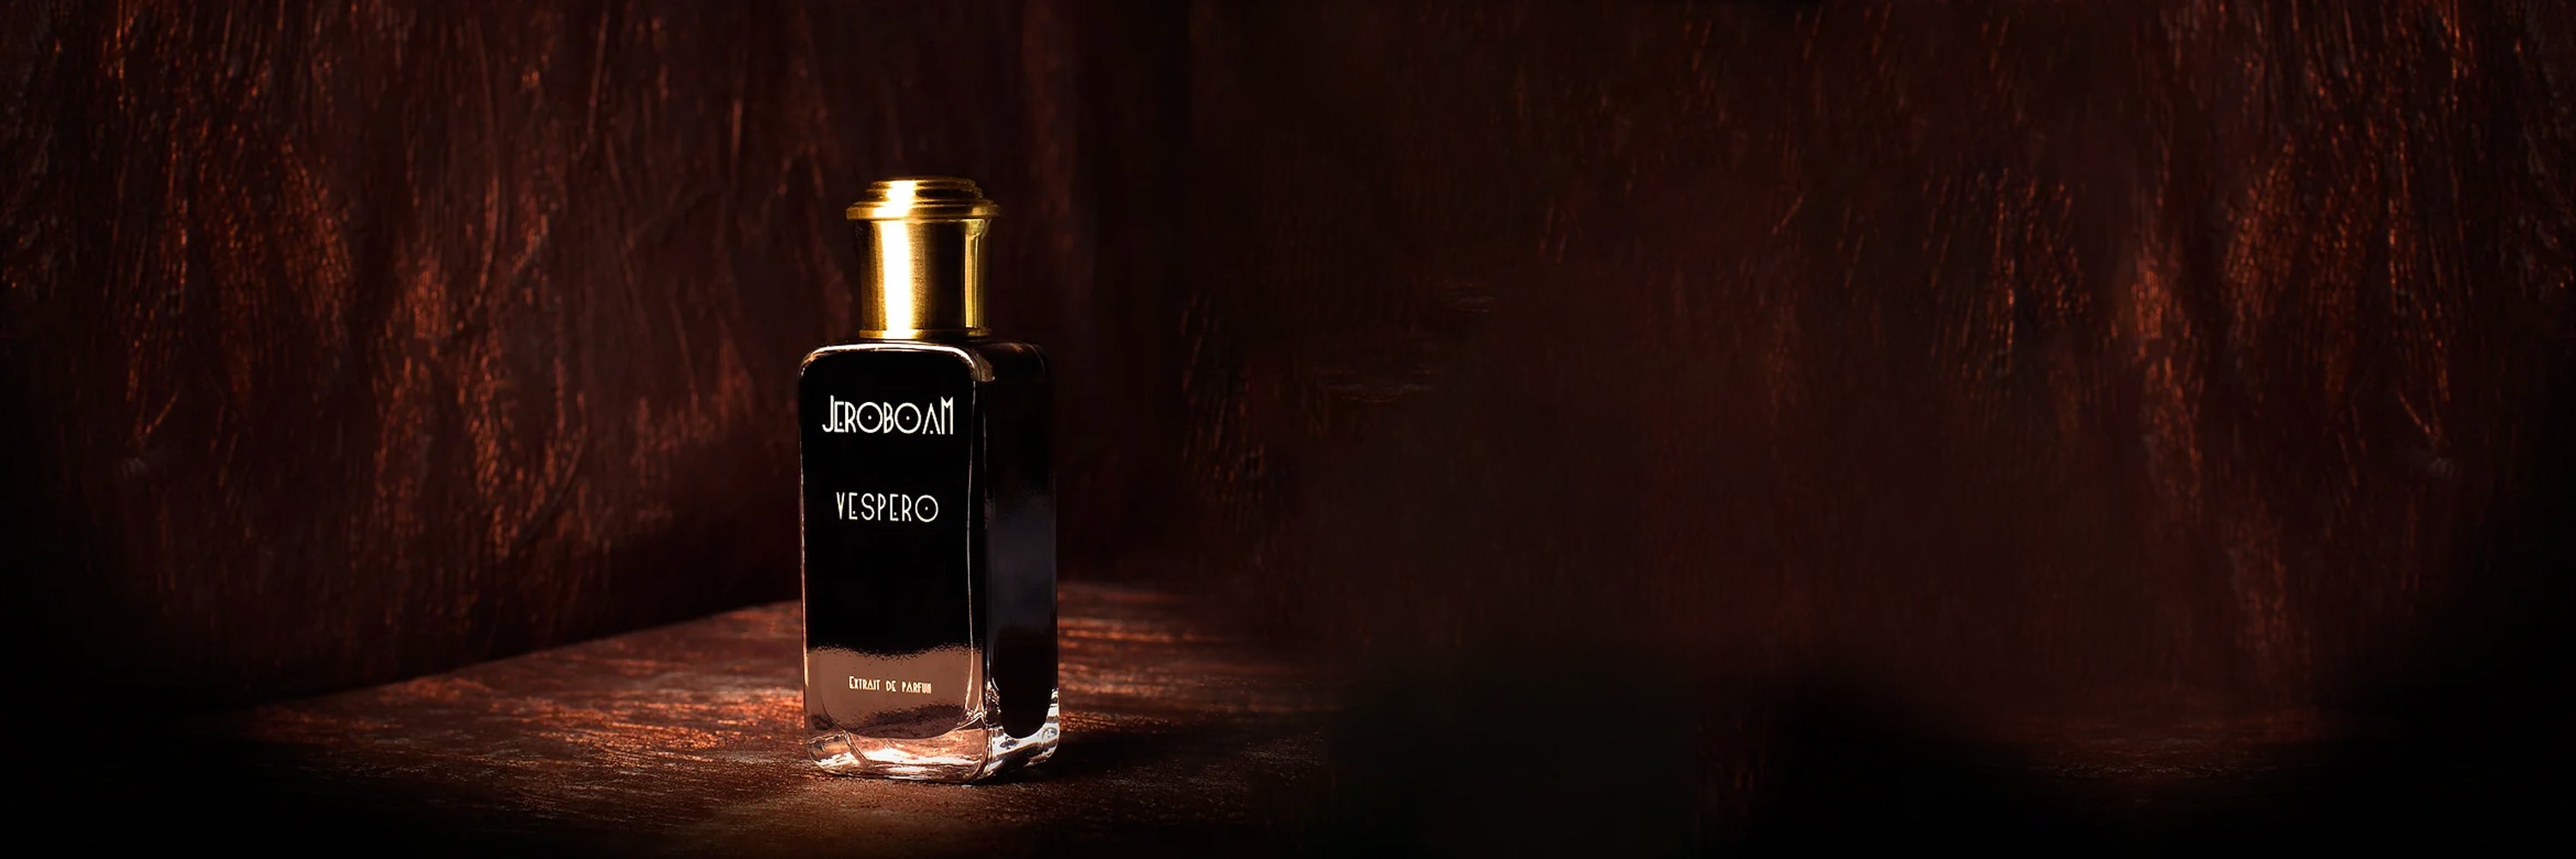 Jeroboam collection at Aedes Perfumery